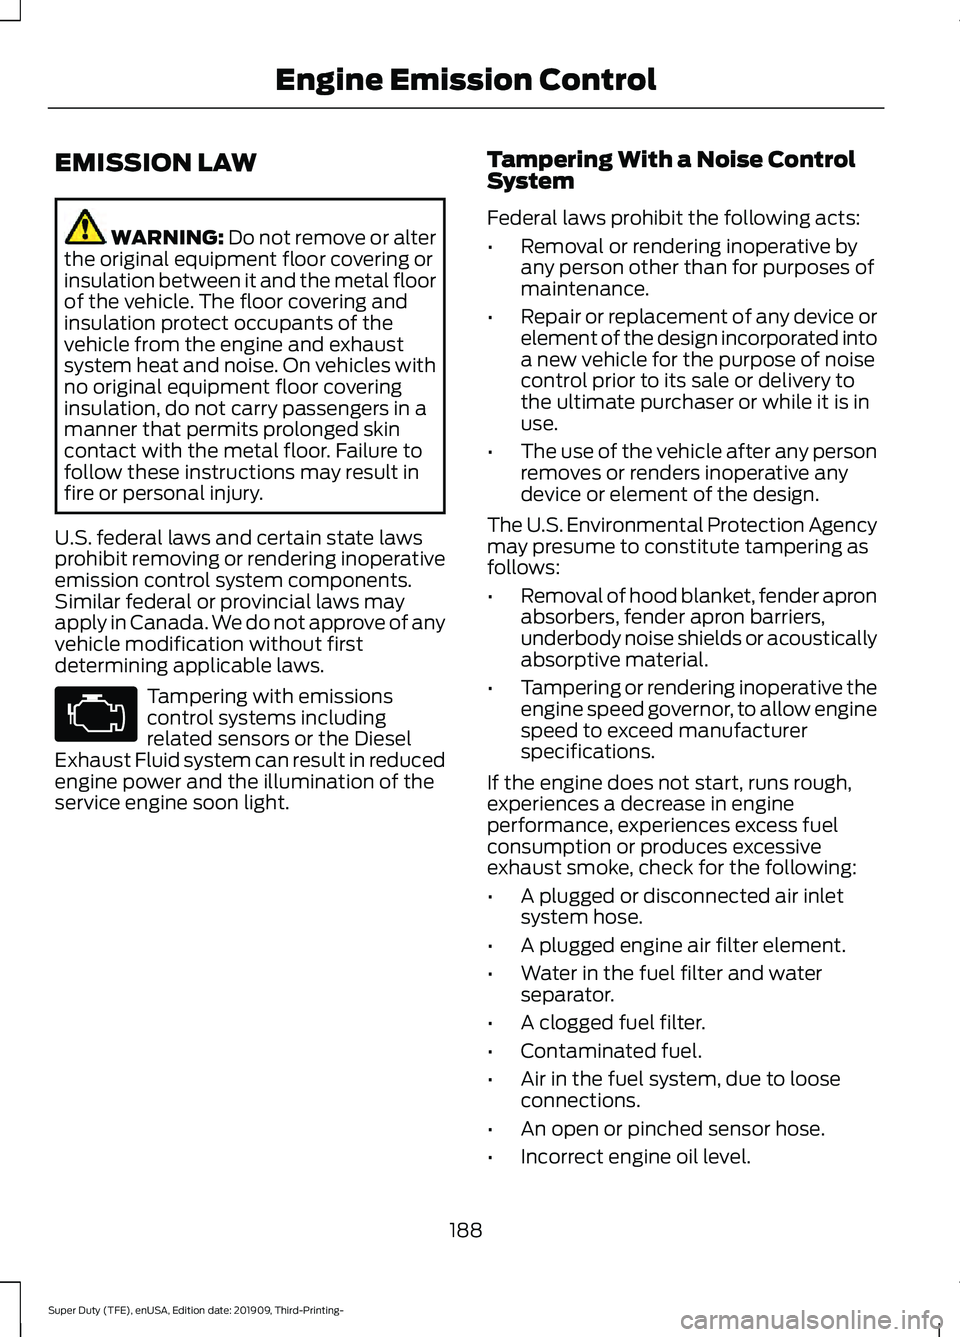 FORD F-450 2020  Owners Manual EMISSION LAW
WARNING: Do not remove or alter
the original equipment floor covering or
insulation between it and the metal floor
of the vehicle. The floor covering and
insulation protect occupants of t